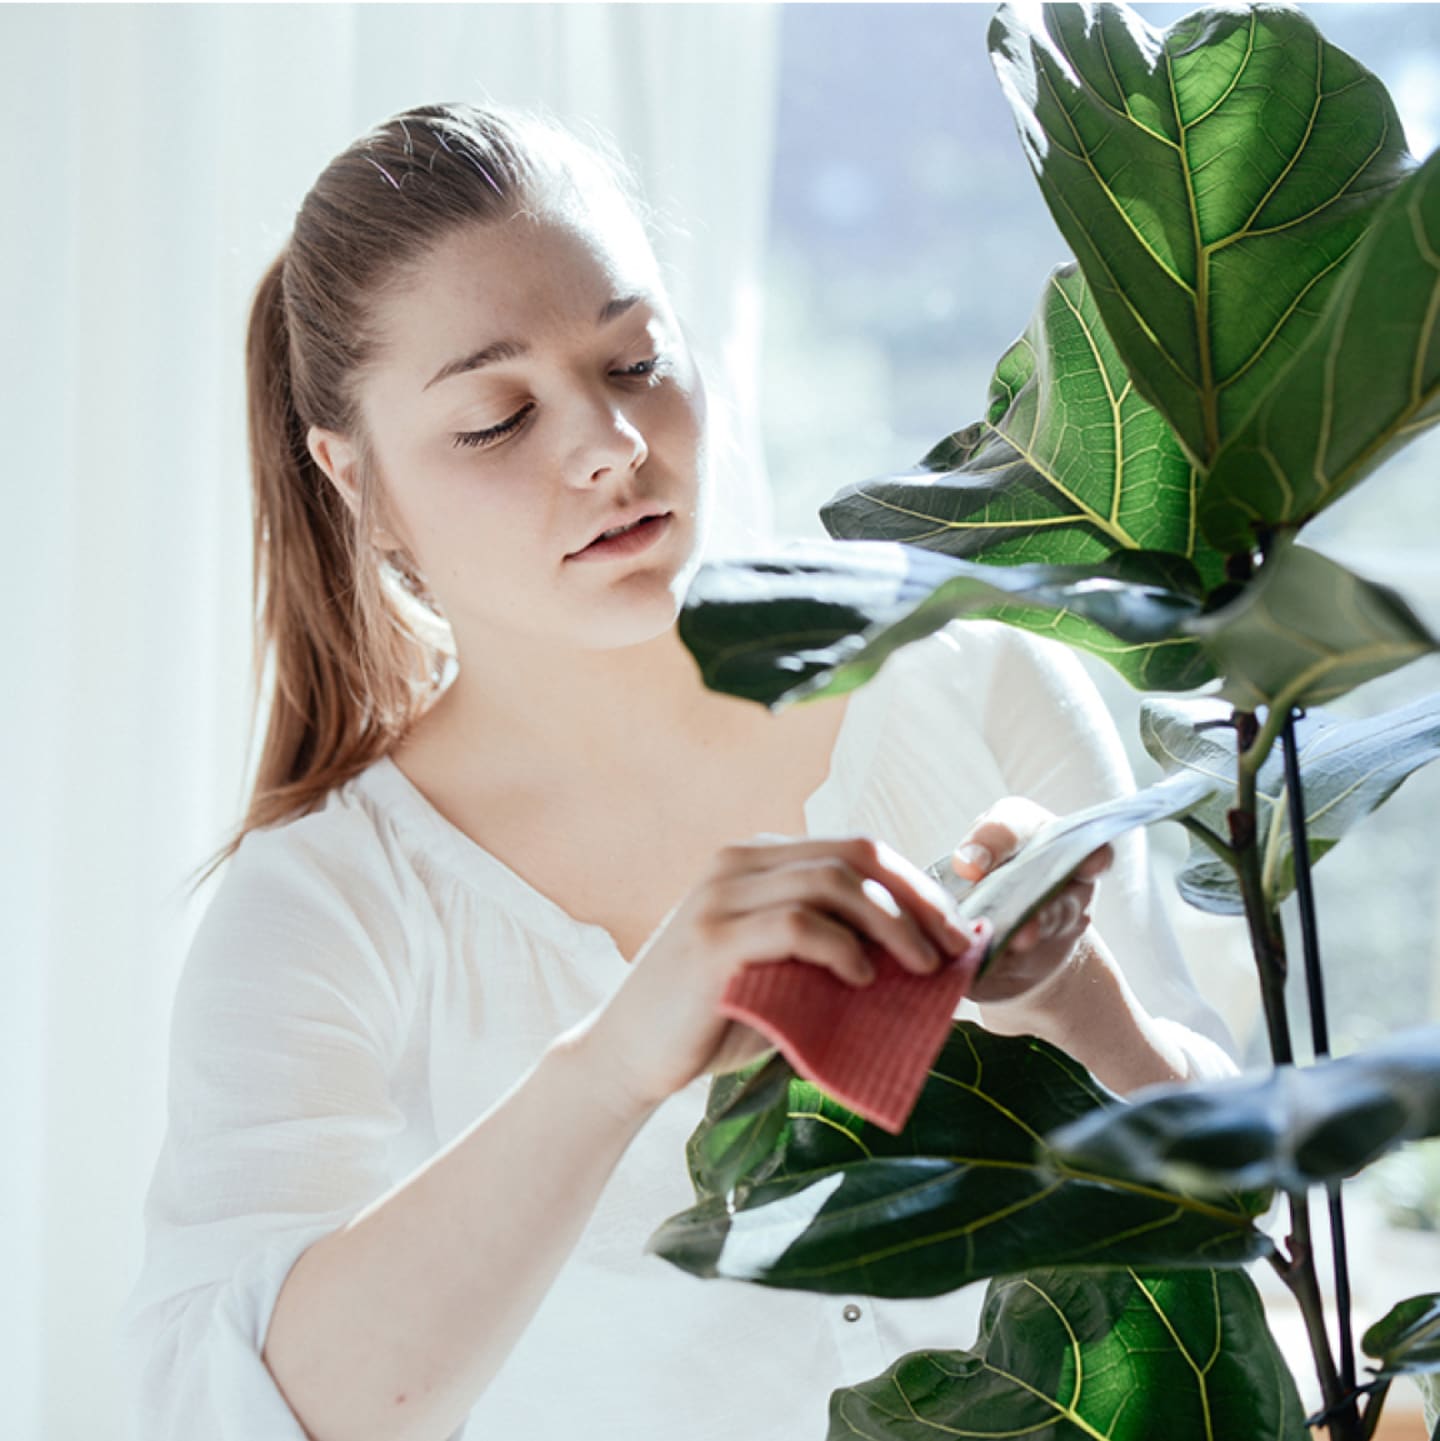 Woman tending to a house plant.